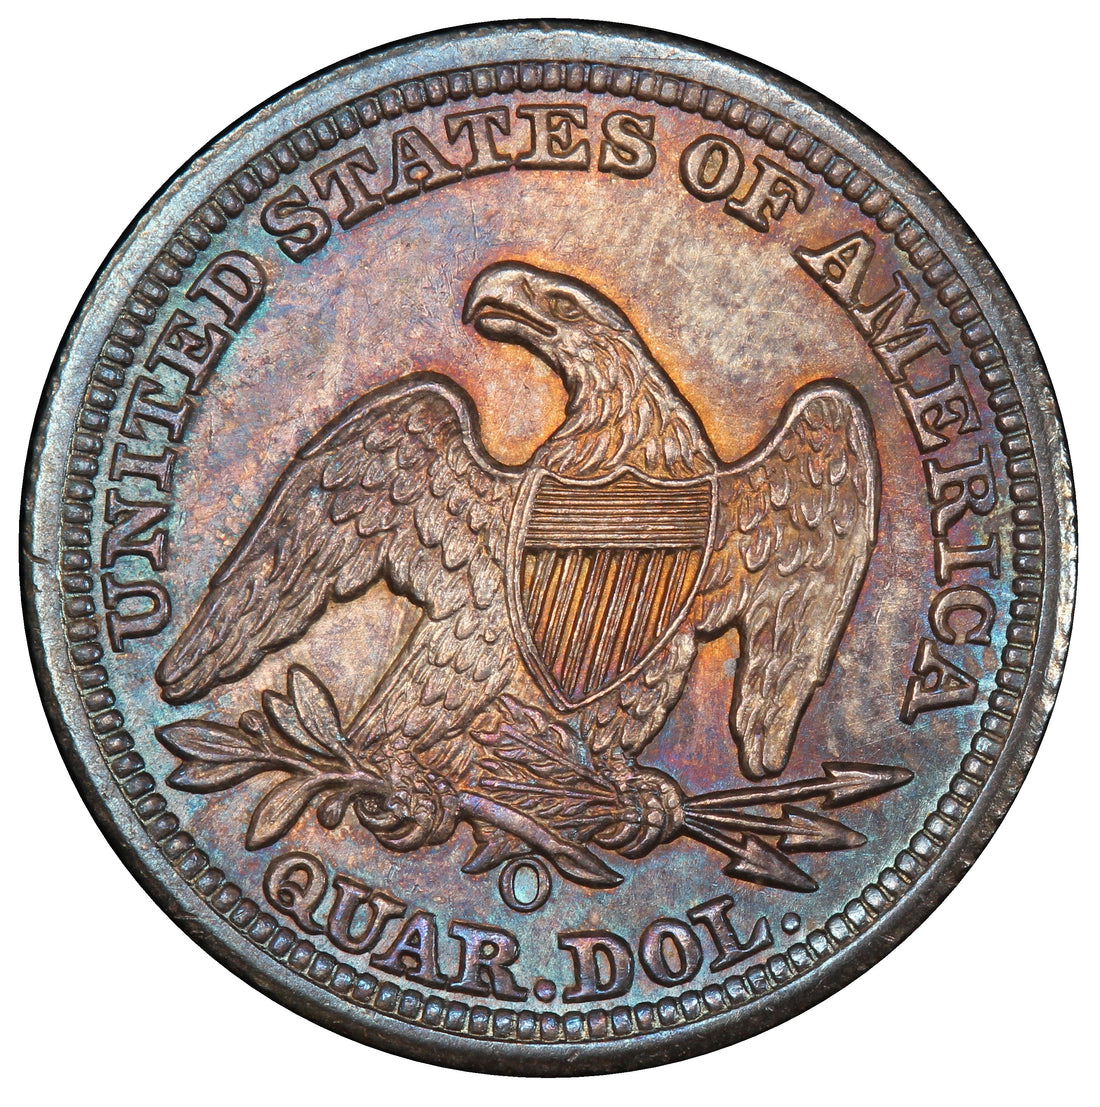 Recognize and Identify Rare Coins